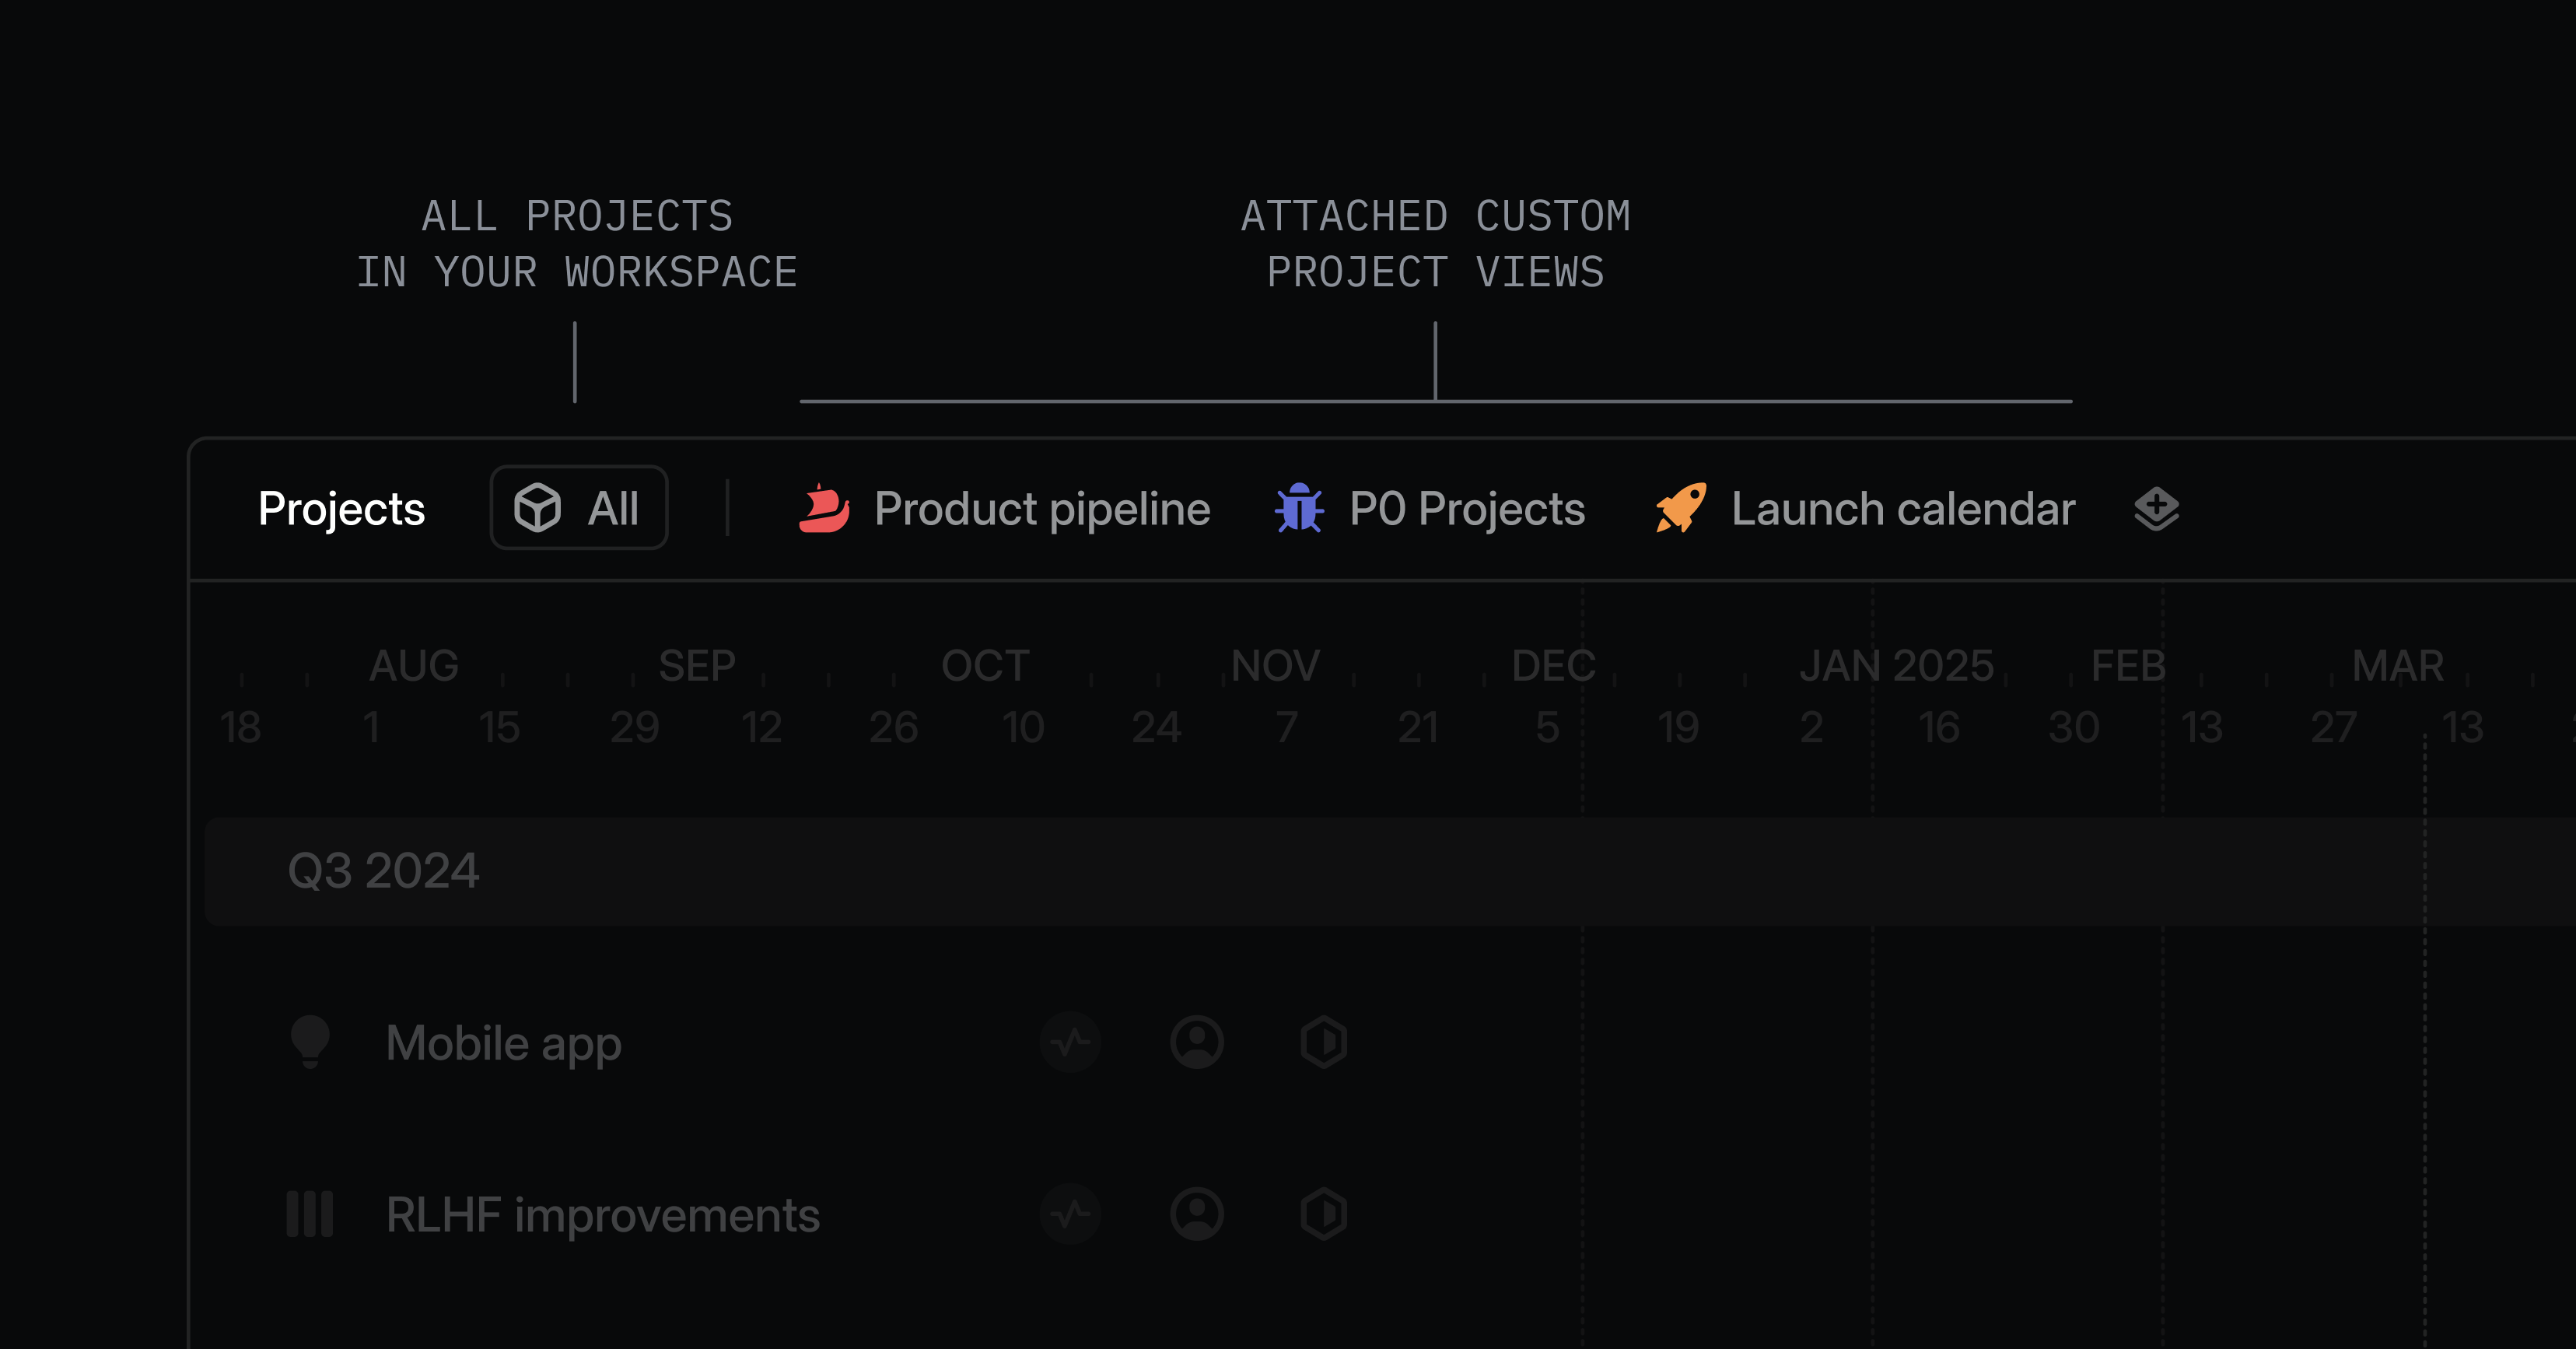 A screenshot of the new Projects page in Linear highlighting the top navbar containing "All projects" and a variety of attached custom project views